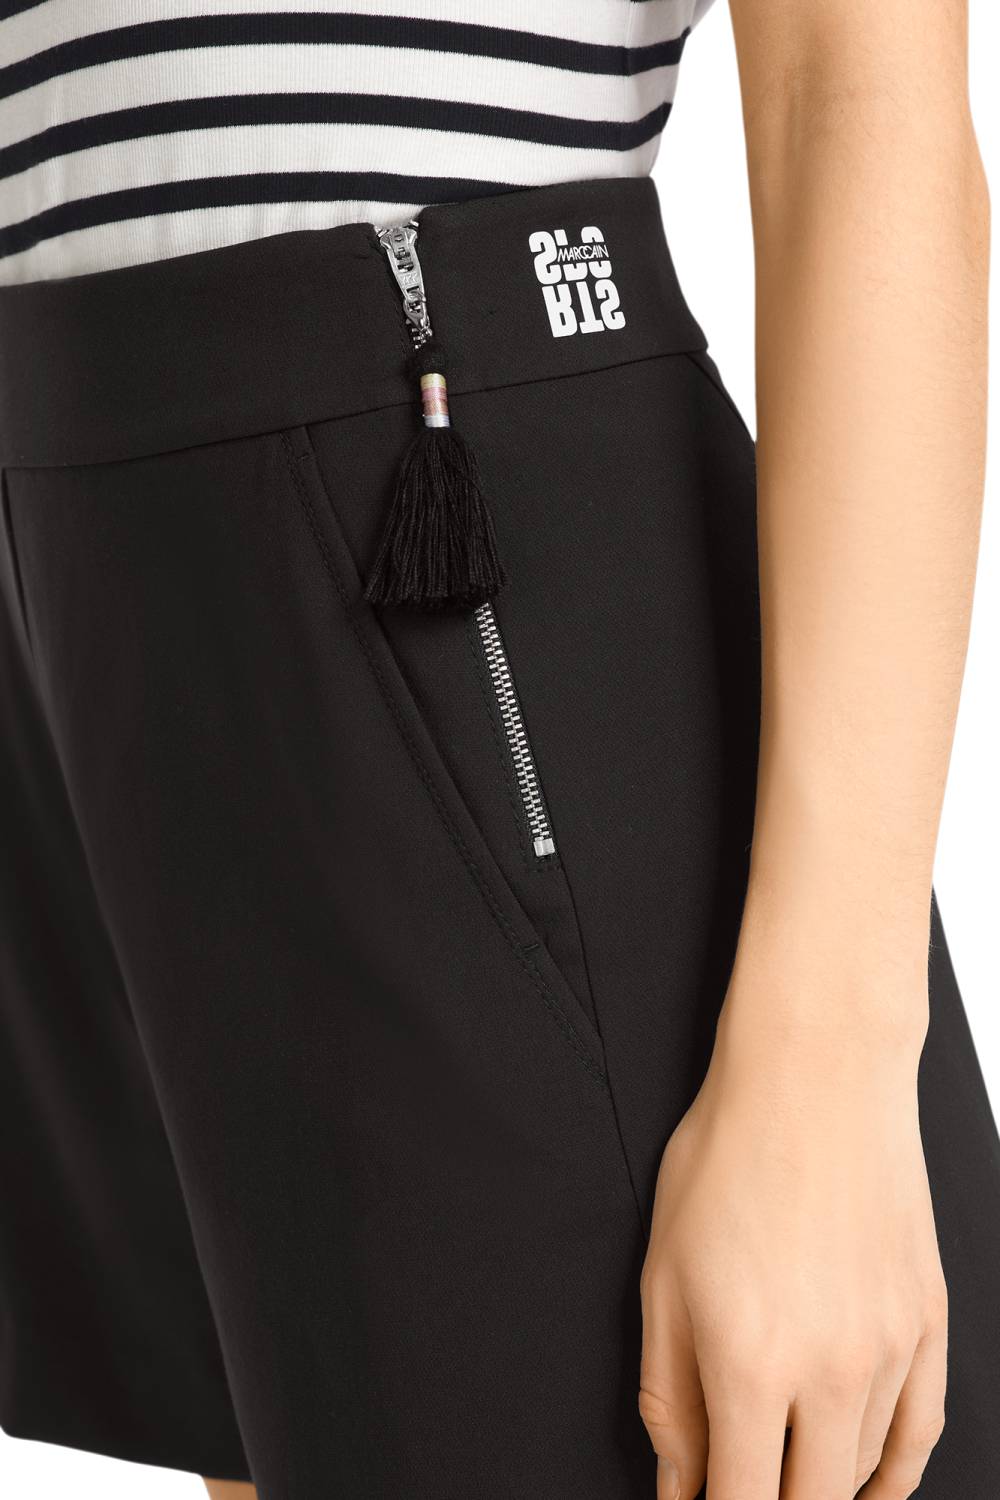 Figure-hugging shorts from the “Rethink Together” sustainability label. These shorts are tailored to the figure and feature classic elements such as side pockets and mock back pockets. 